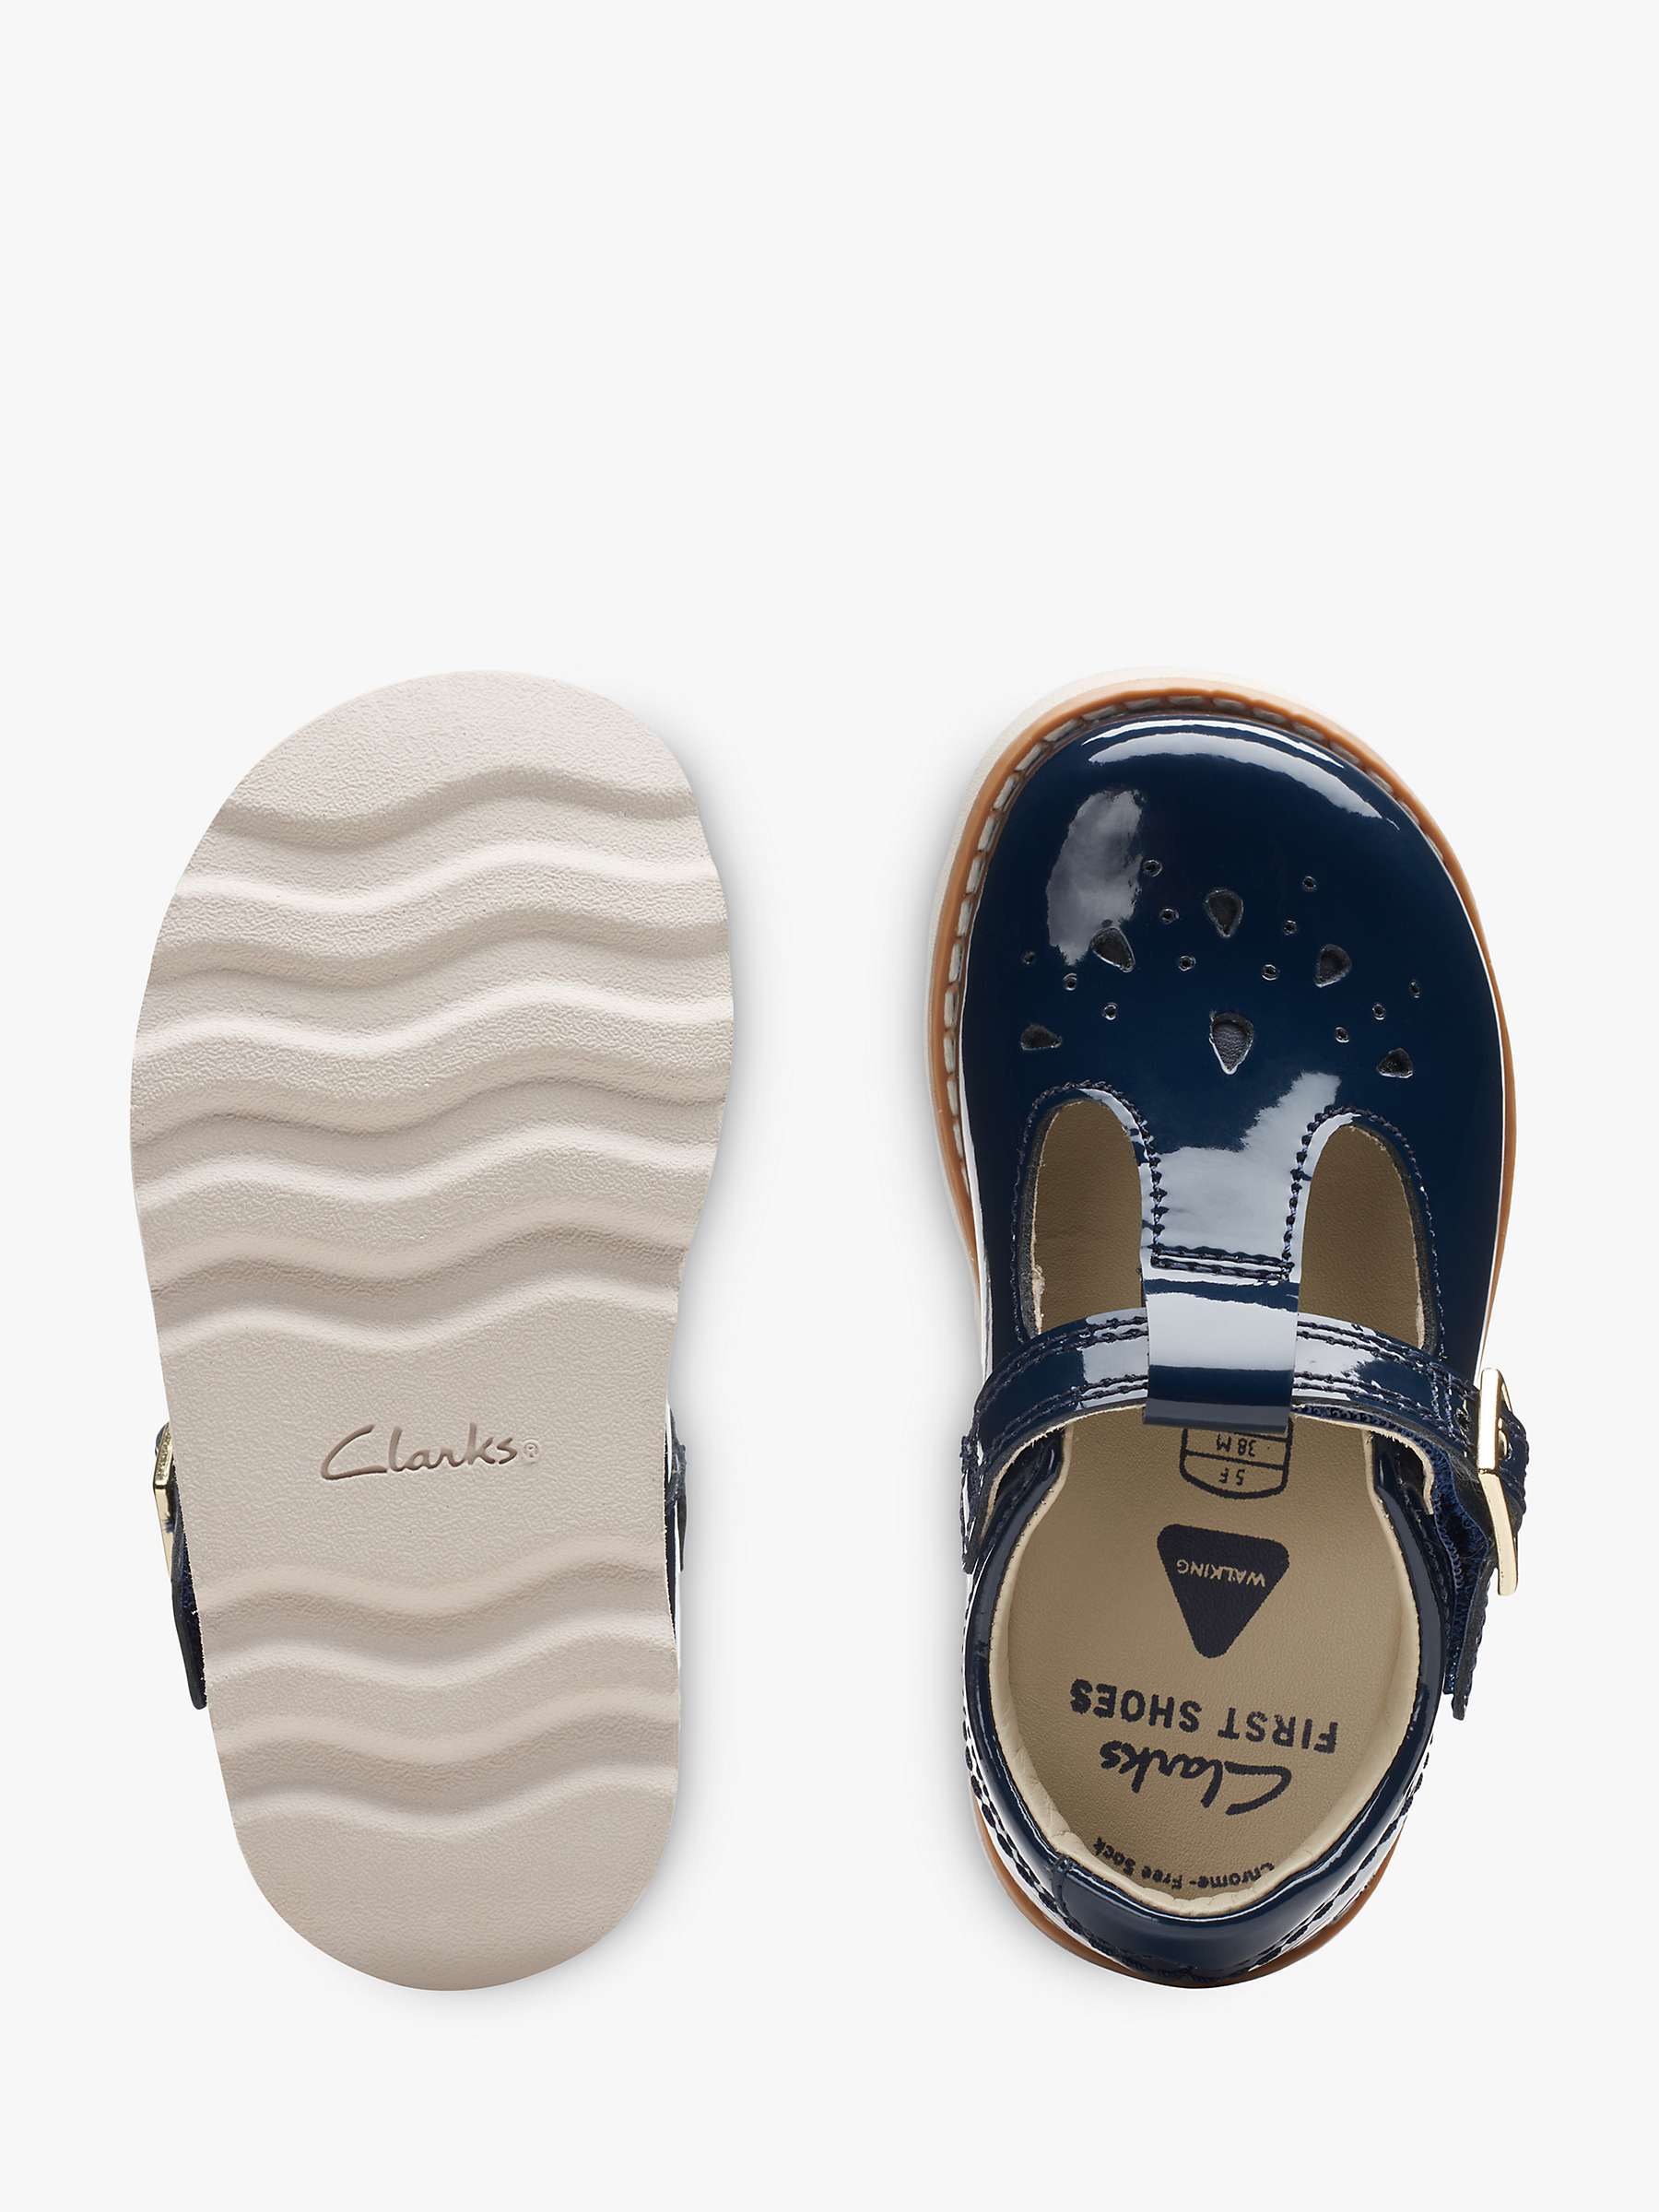 Buy Clarks Kids' Crown Print Leather Patent T-Bar Shoes, Navy Online at johnlewis.com